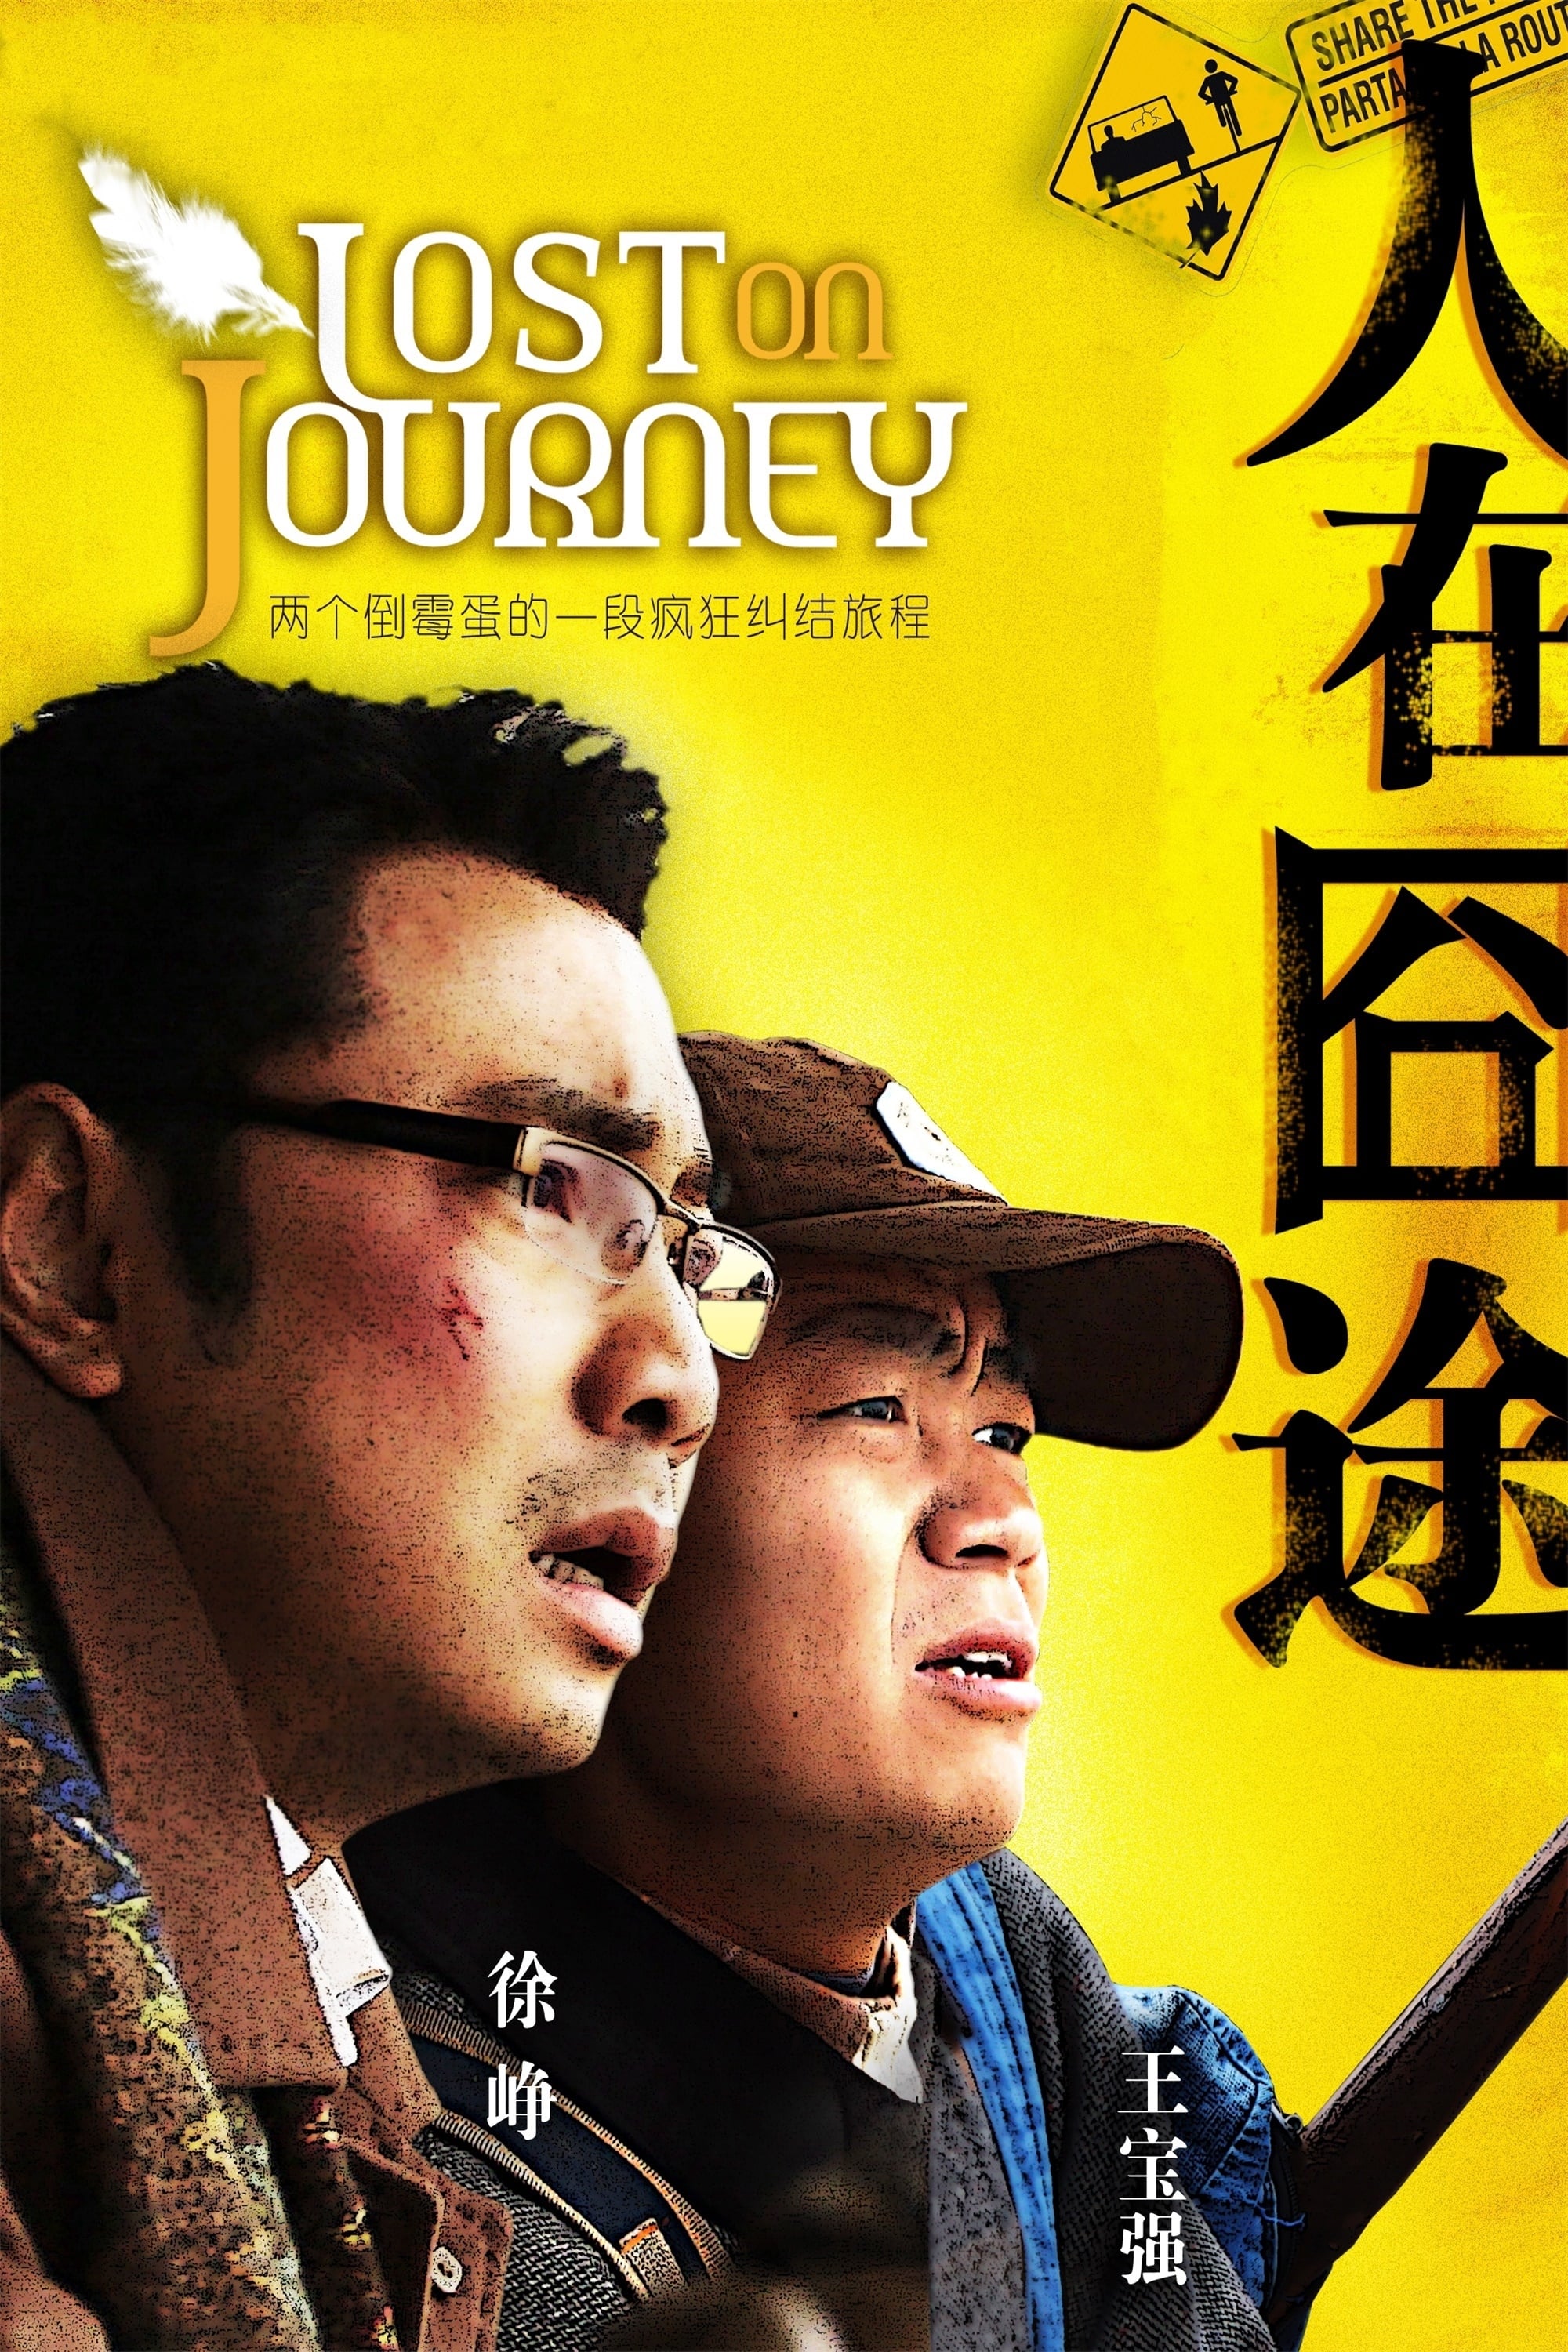 lost on journey 2010